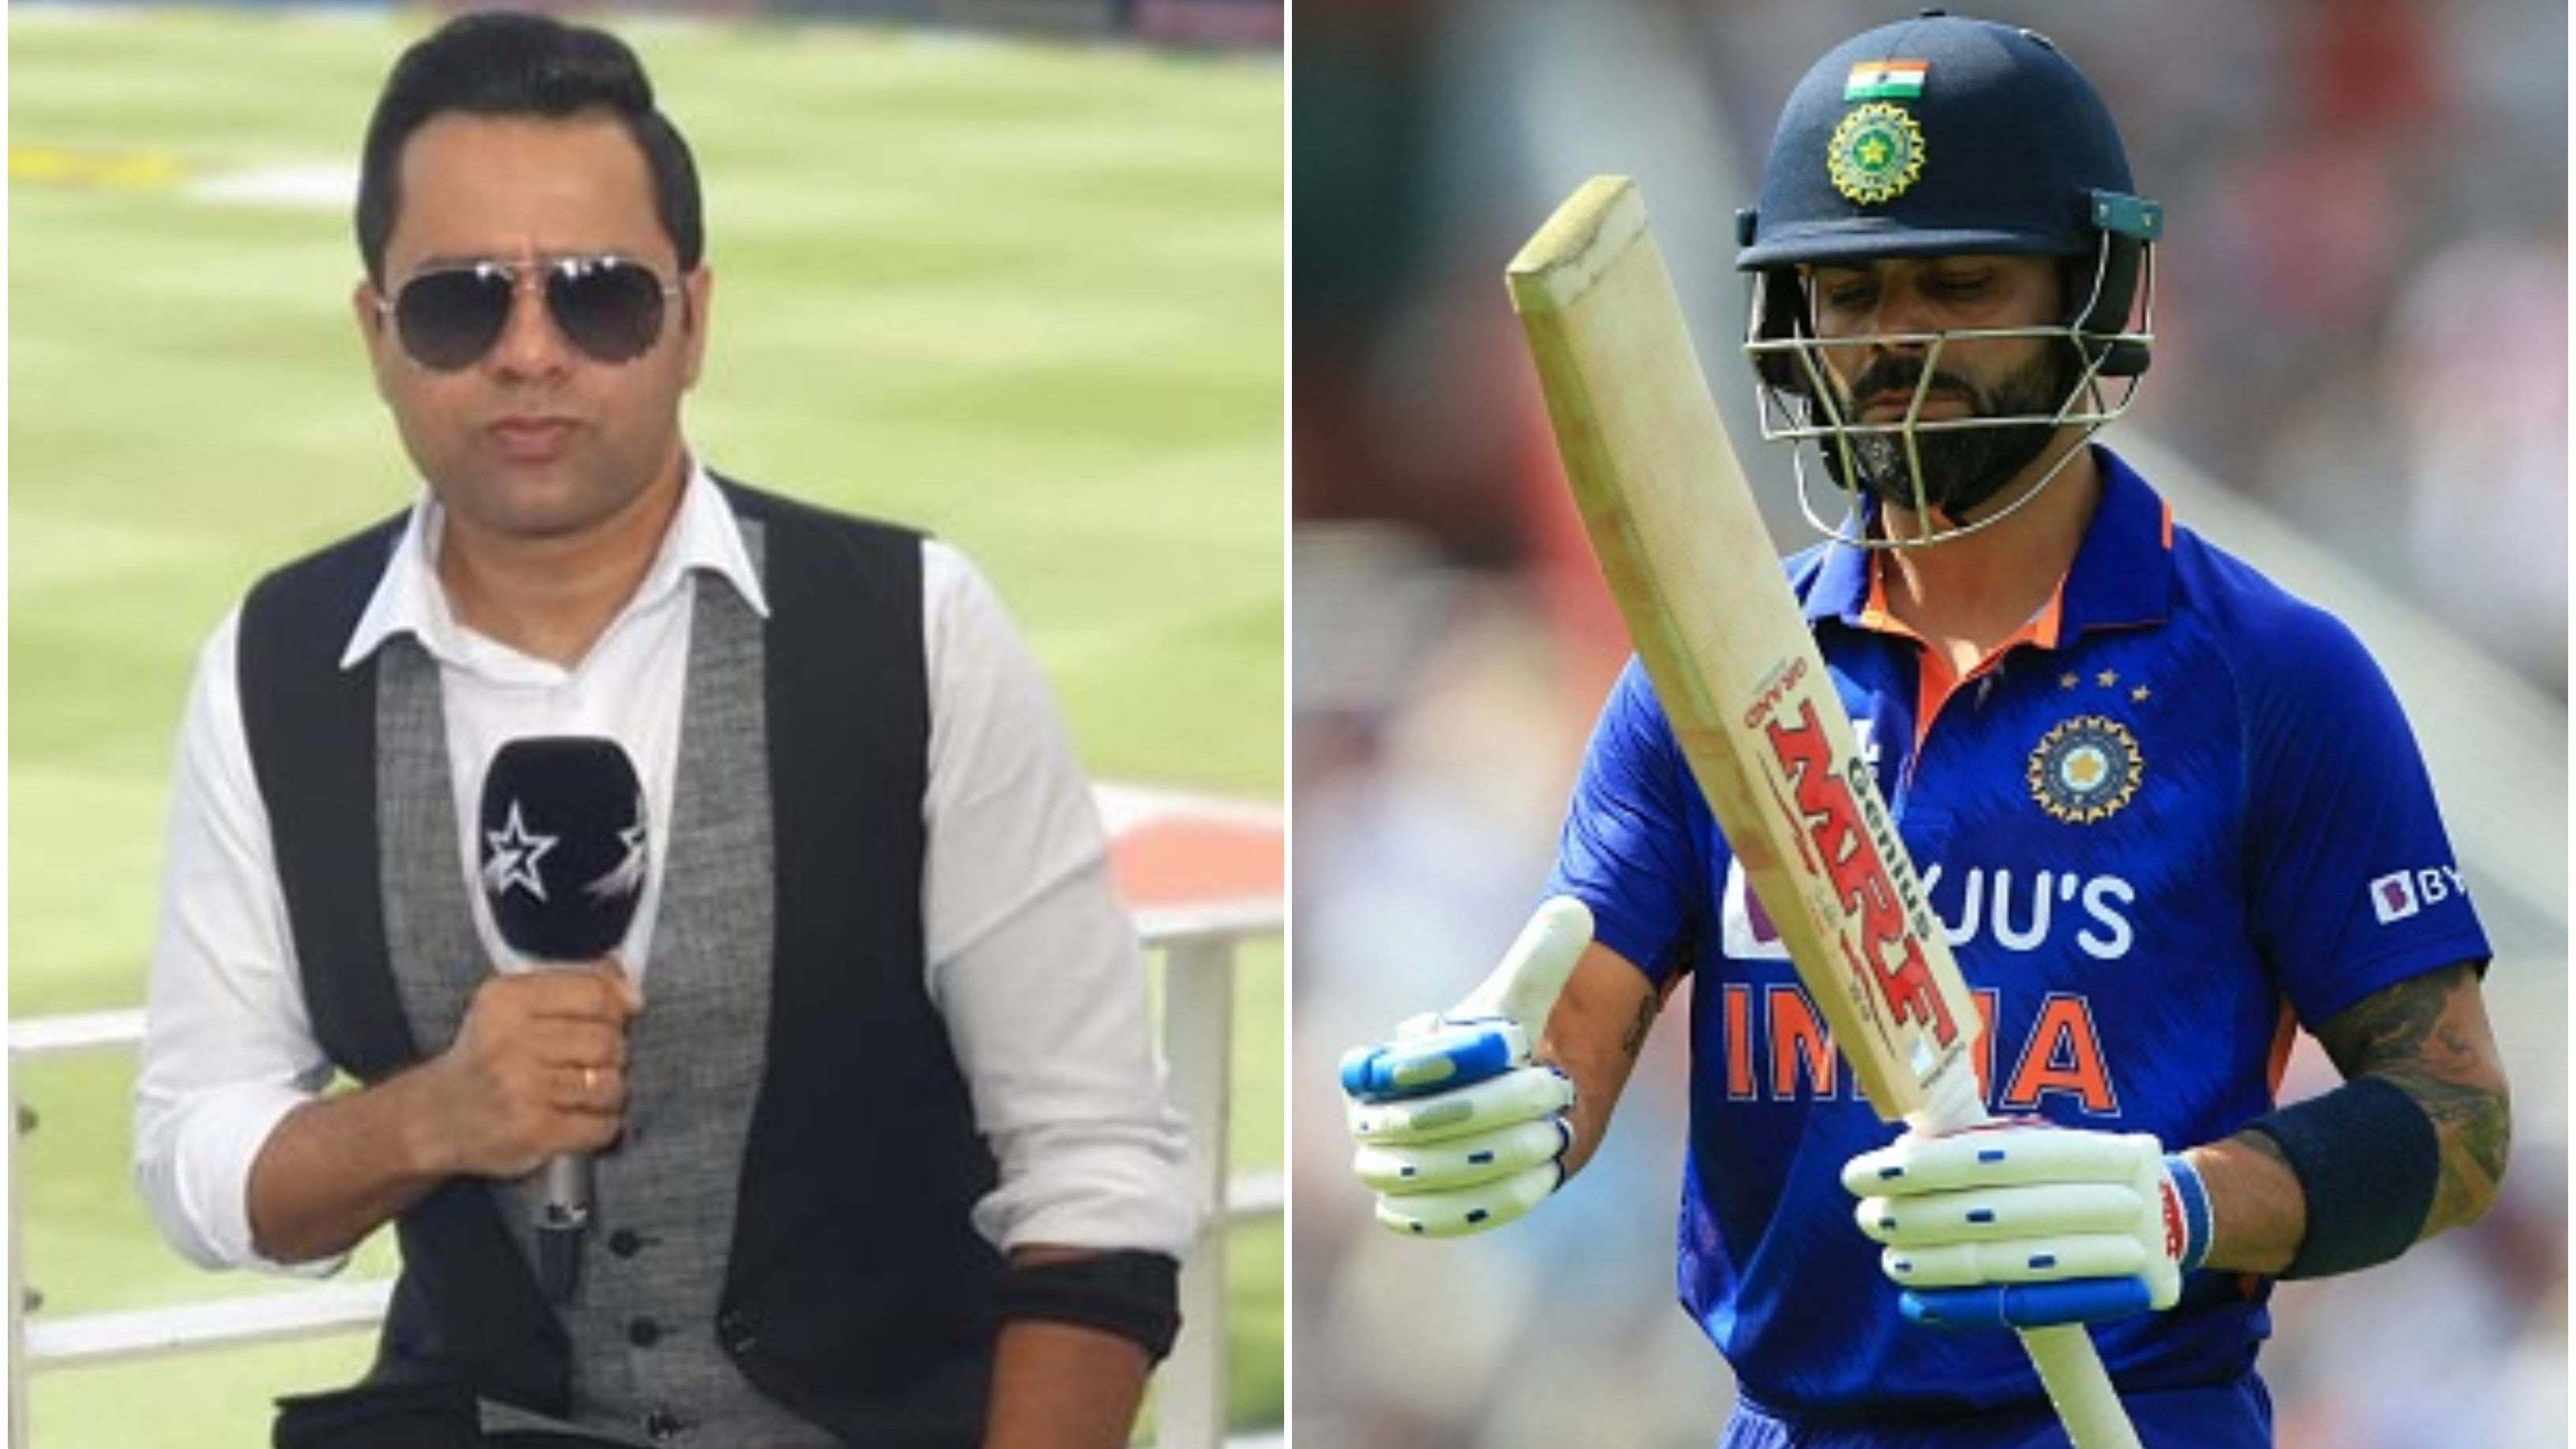 “Aura of invincibility has faded,” Aakash Chopra feels Kohli’s presence doesn't instill fear in bowlers' minds anymore